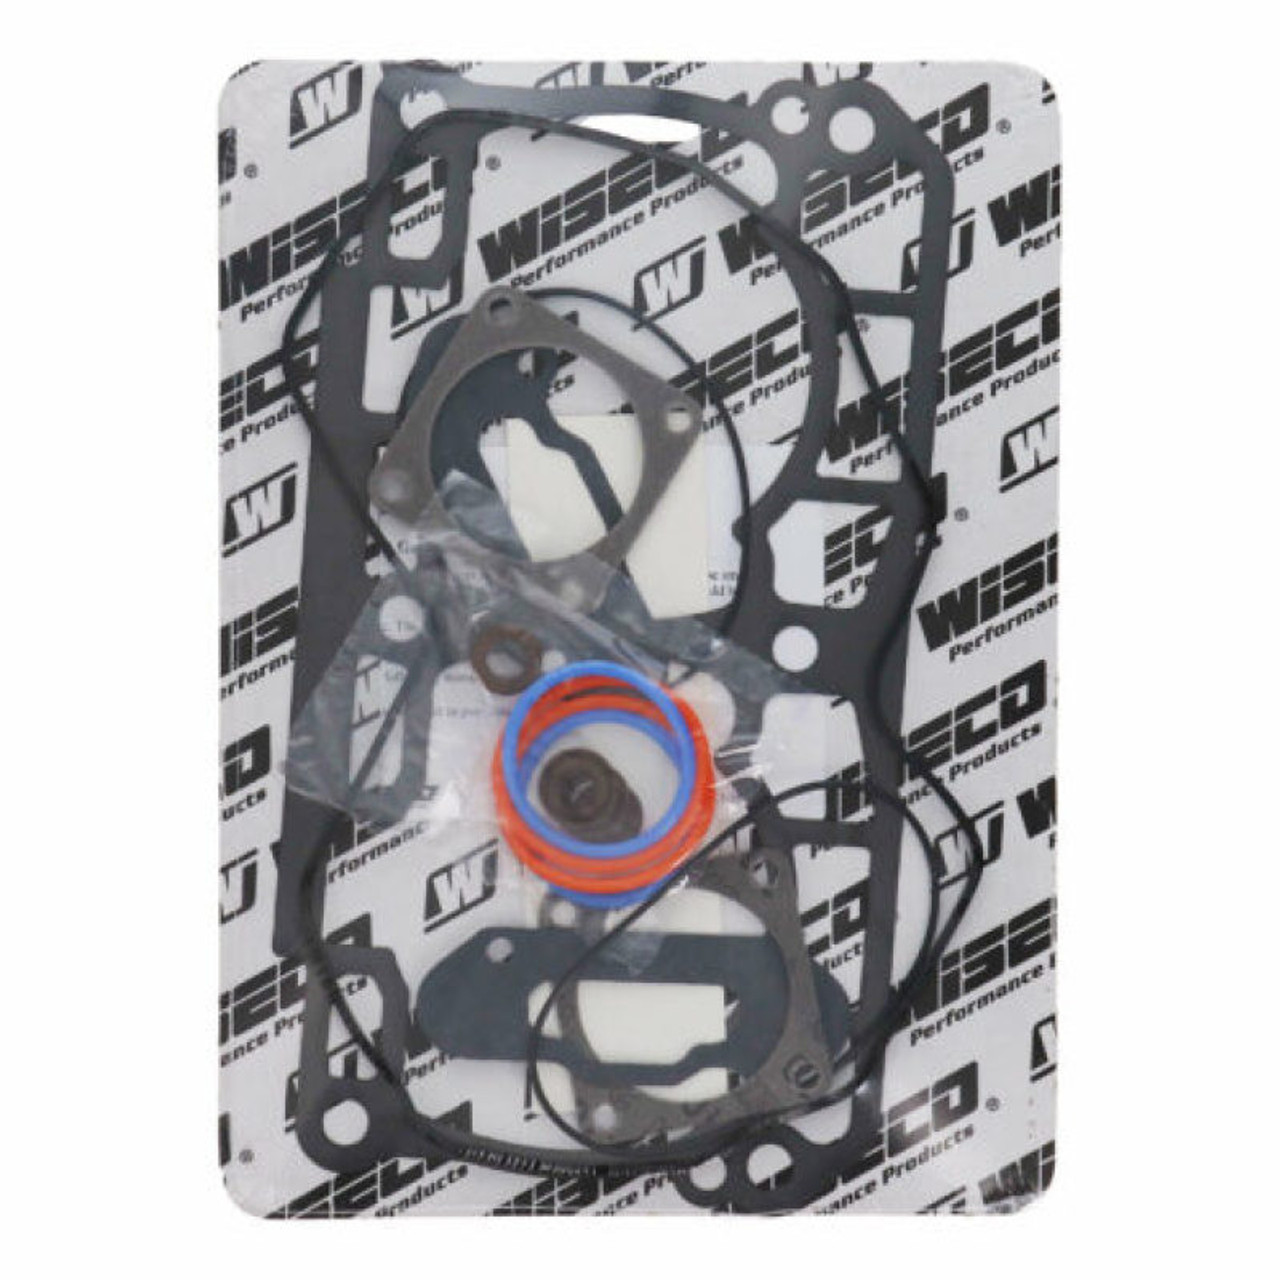 Wiseco 03-07 CR80/92-03 85R 50mm Top End Gasket Kit - W5356 Photo - Primary